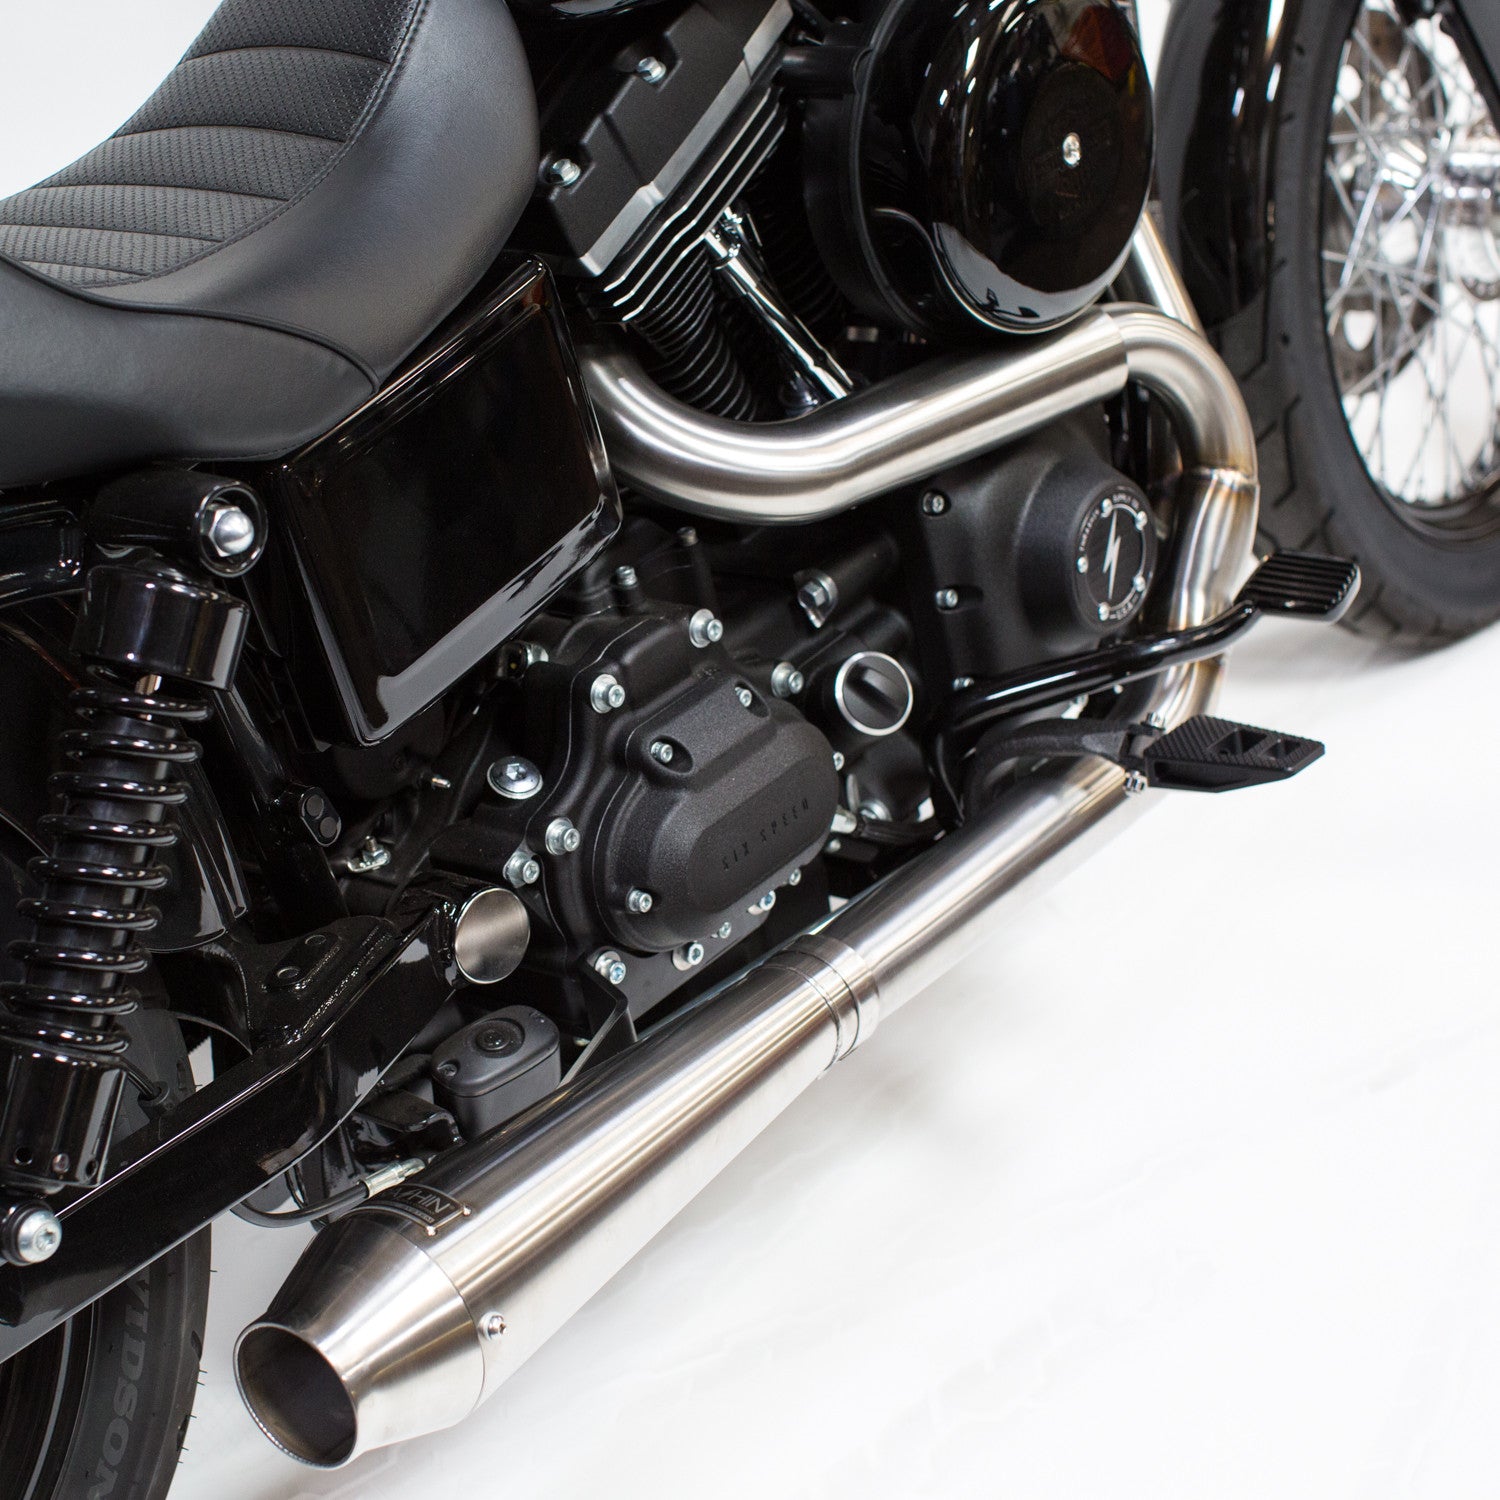 OG Stainless Exhaust w/ Removable Baffle & End Cap - Dyna